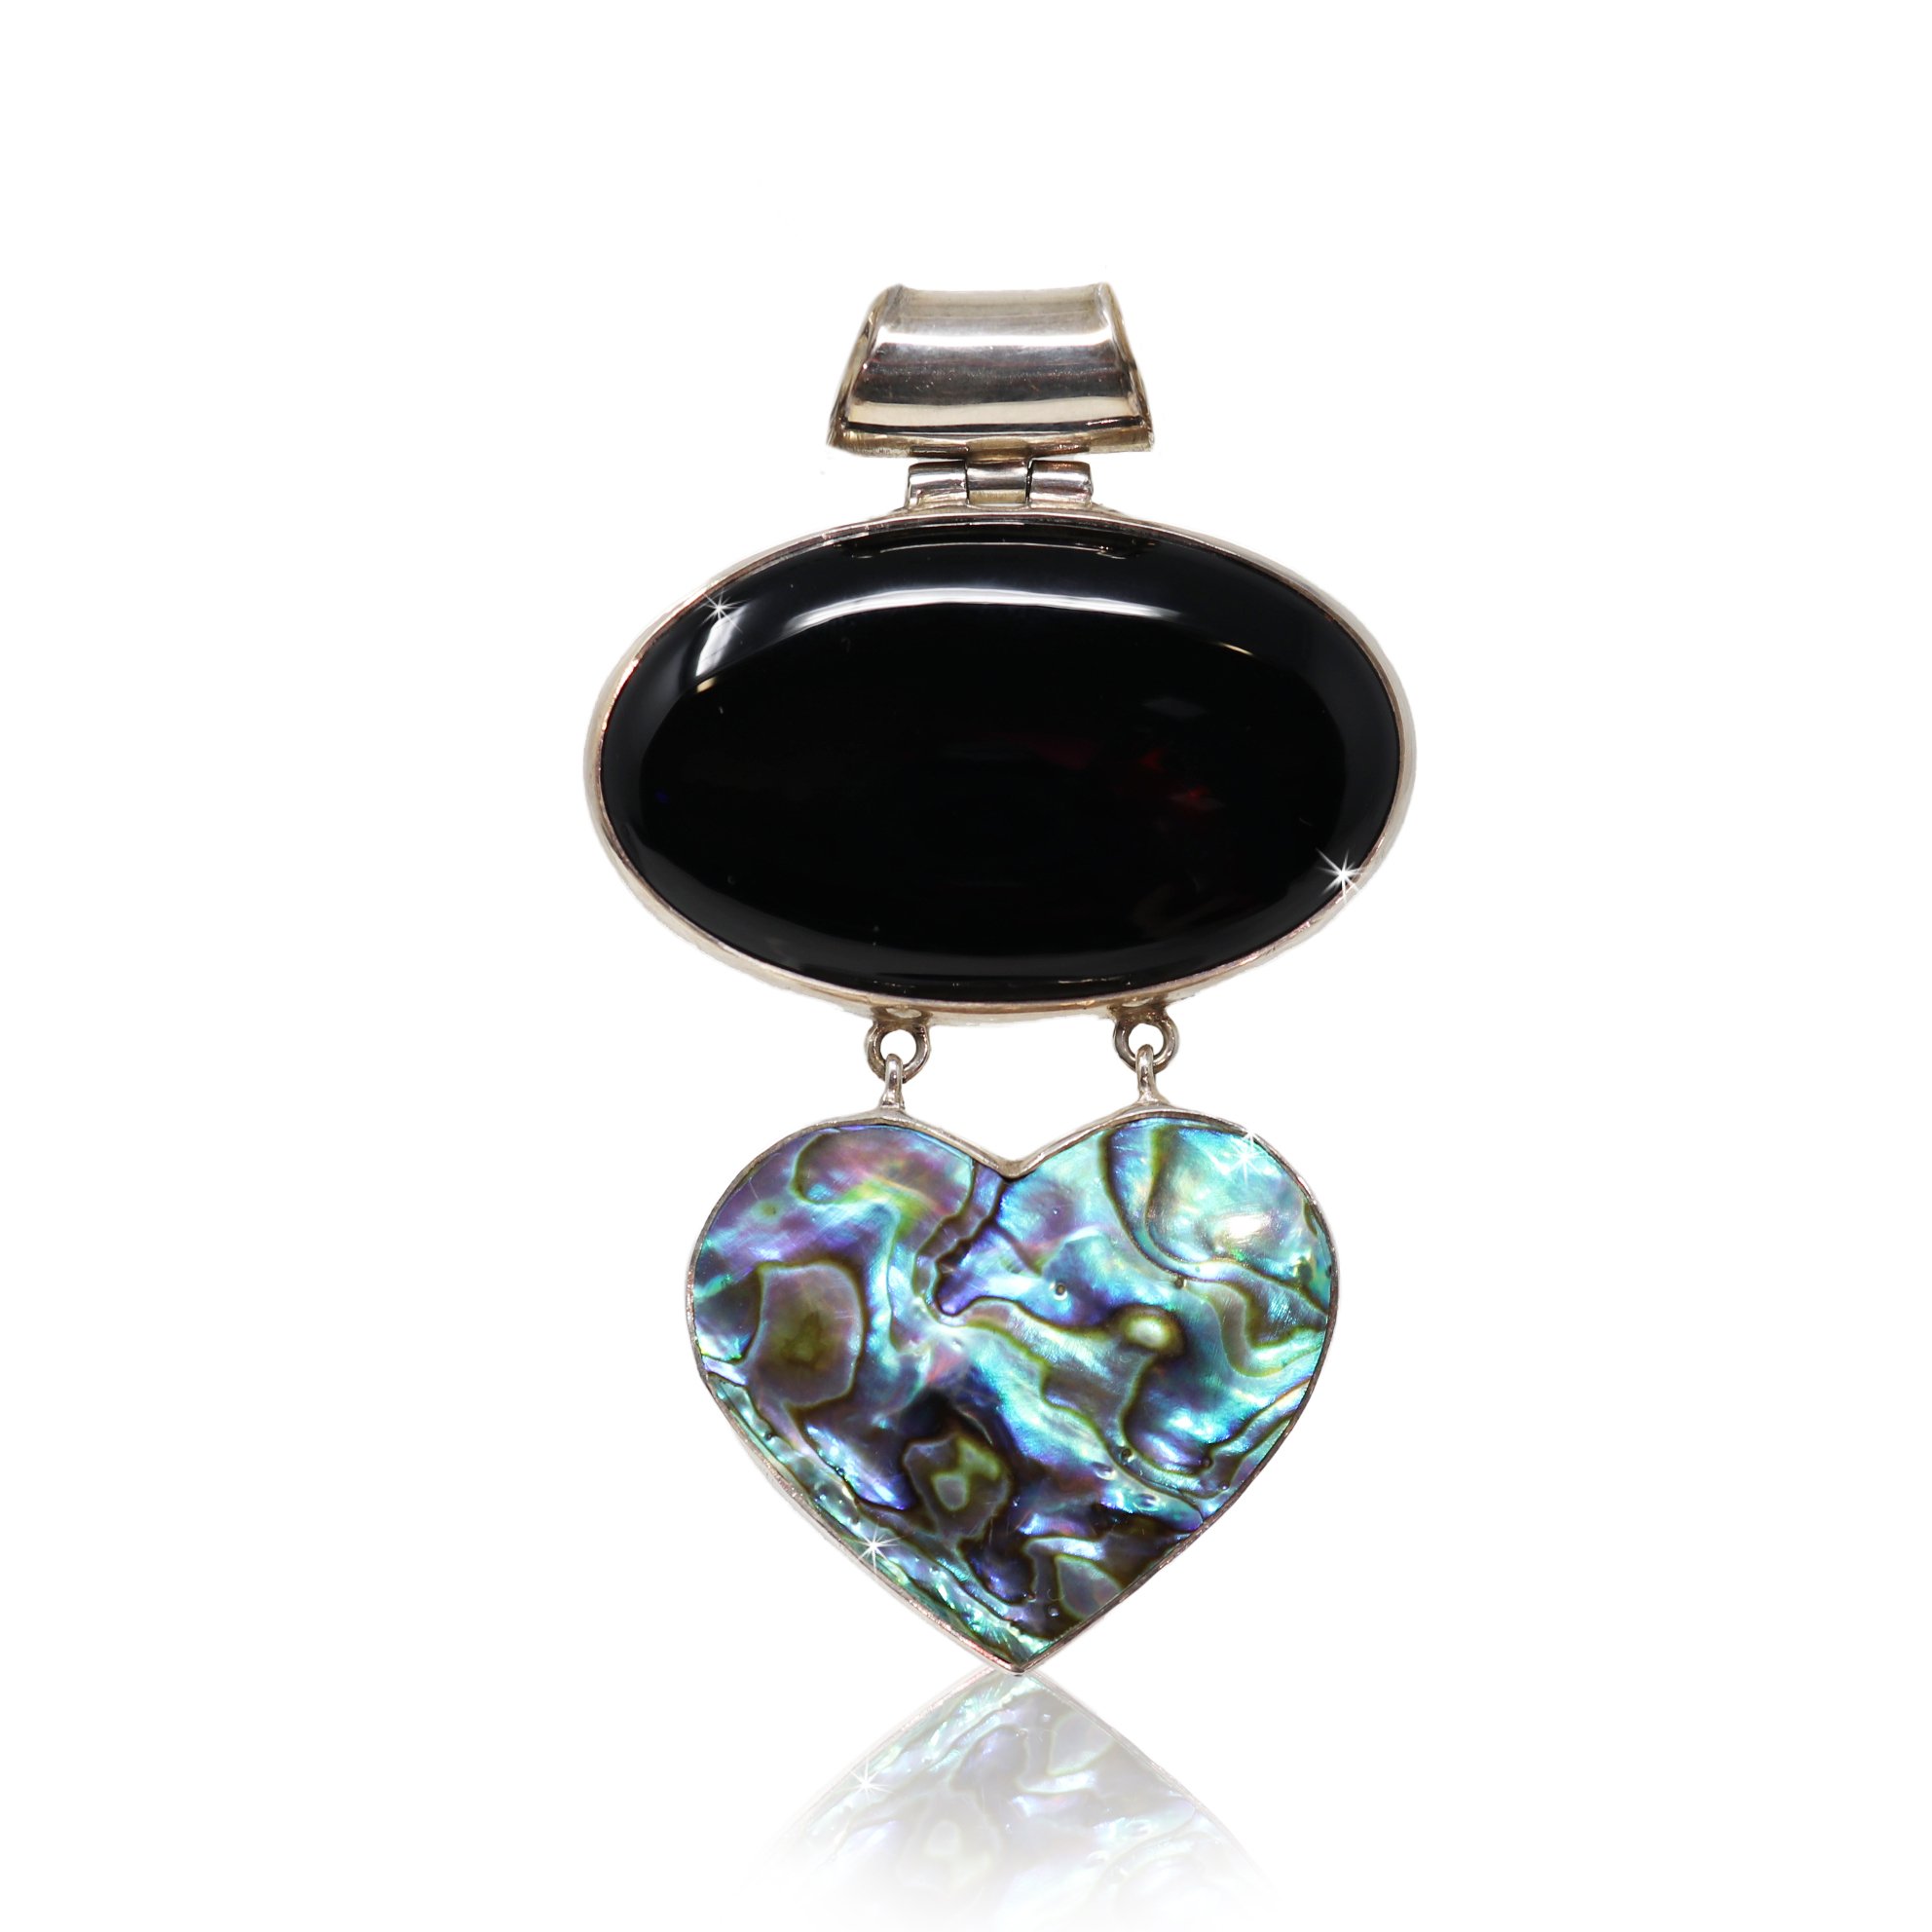 Black Onyx & Abalone Pendant - Oval Cabcohon With Heart Linked On Bottom & Silver Bezels With Tube Bail